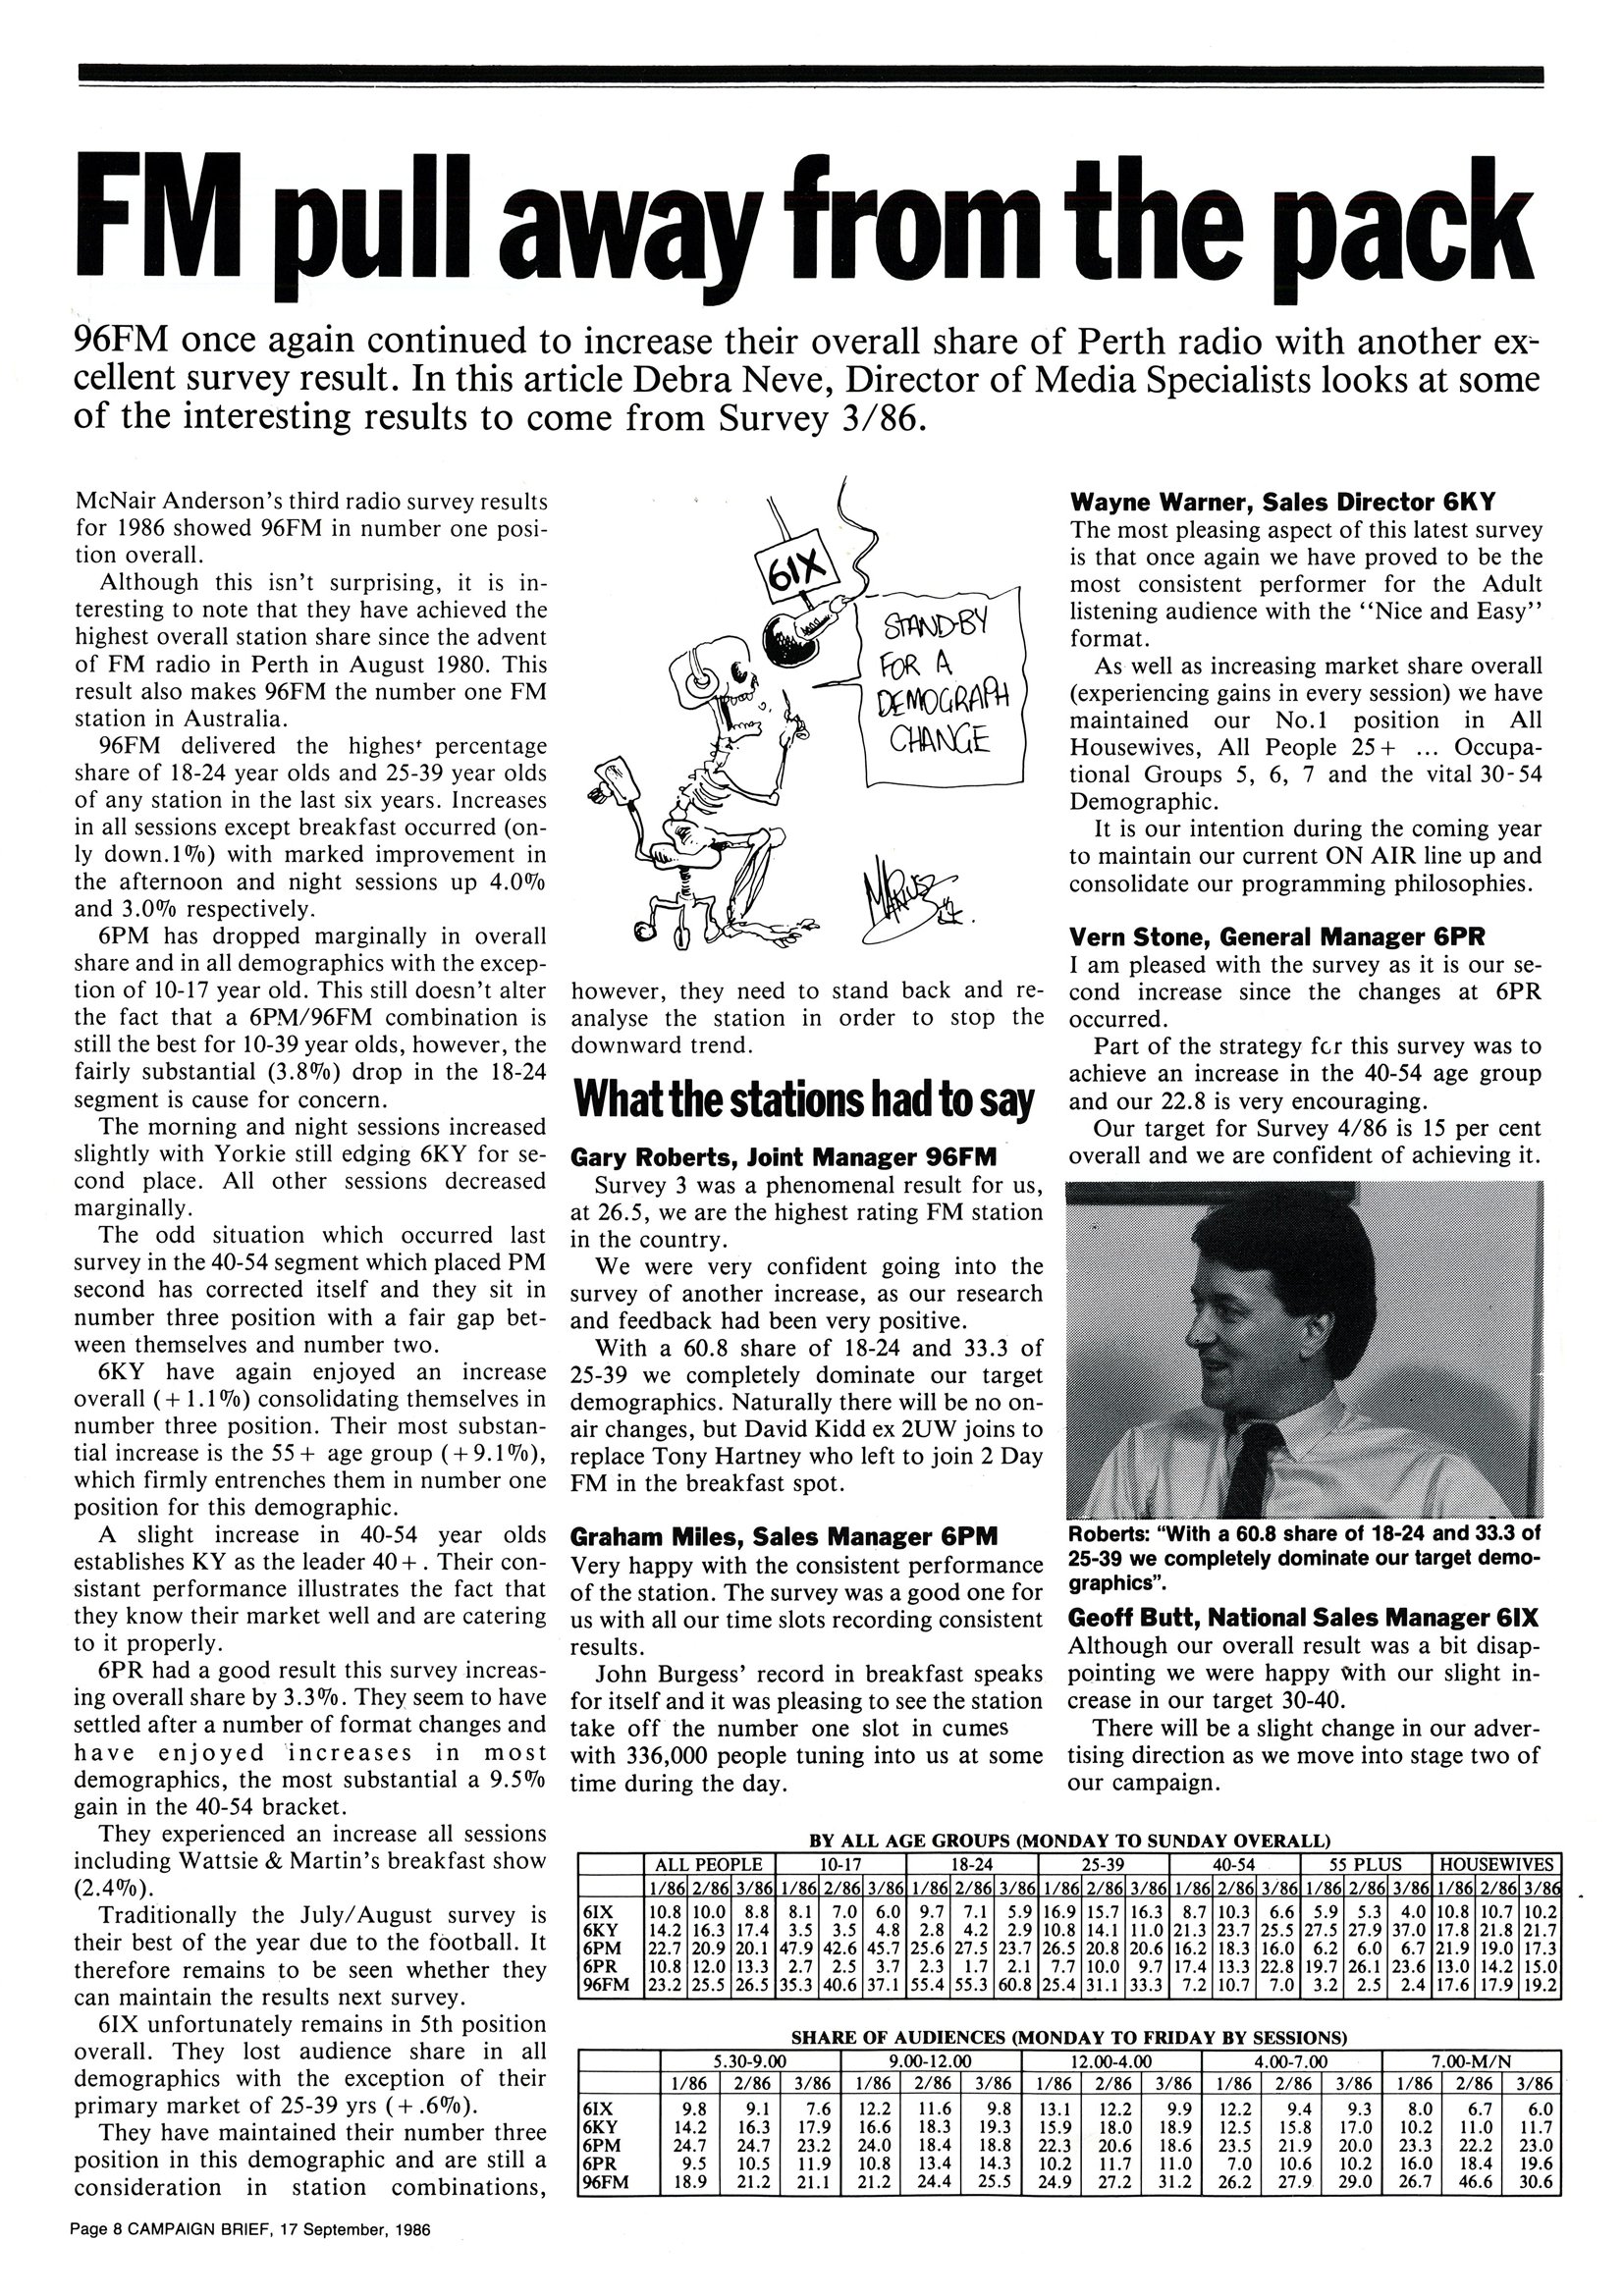 1986.09.17 - Article - FM pull away from the pack - Campaign Brief WA.png